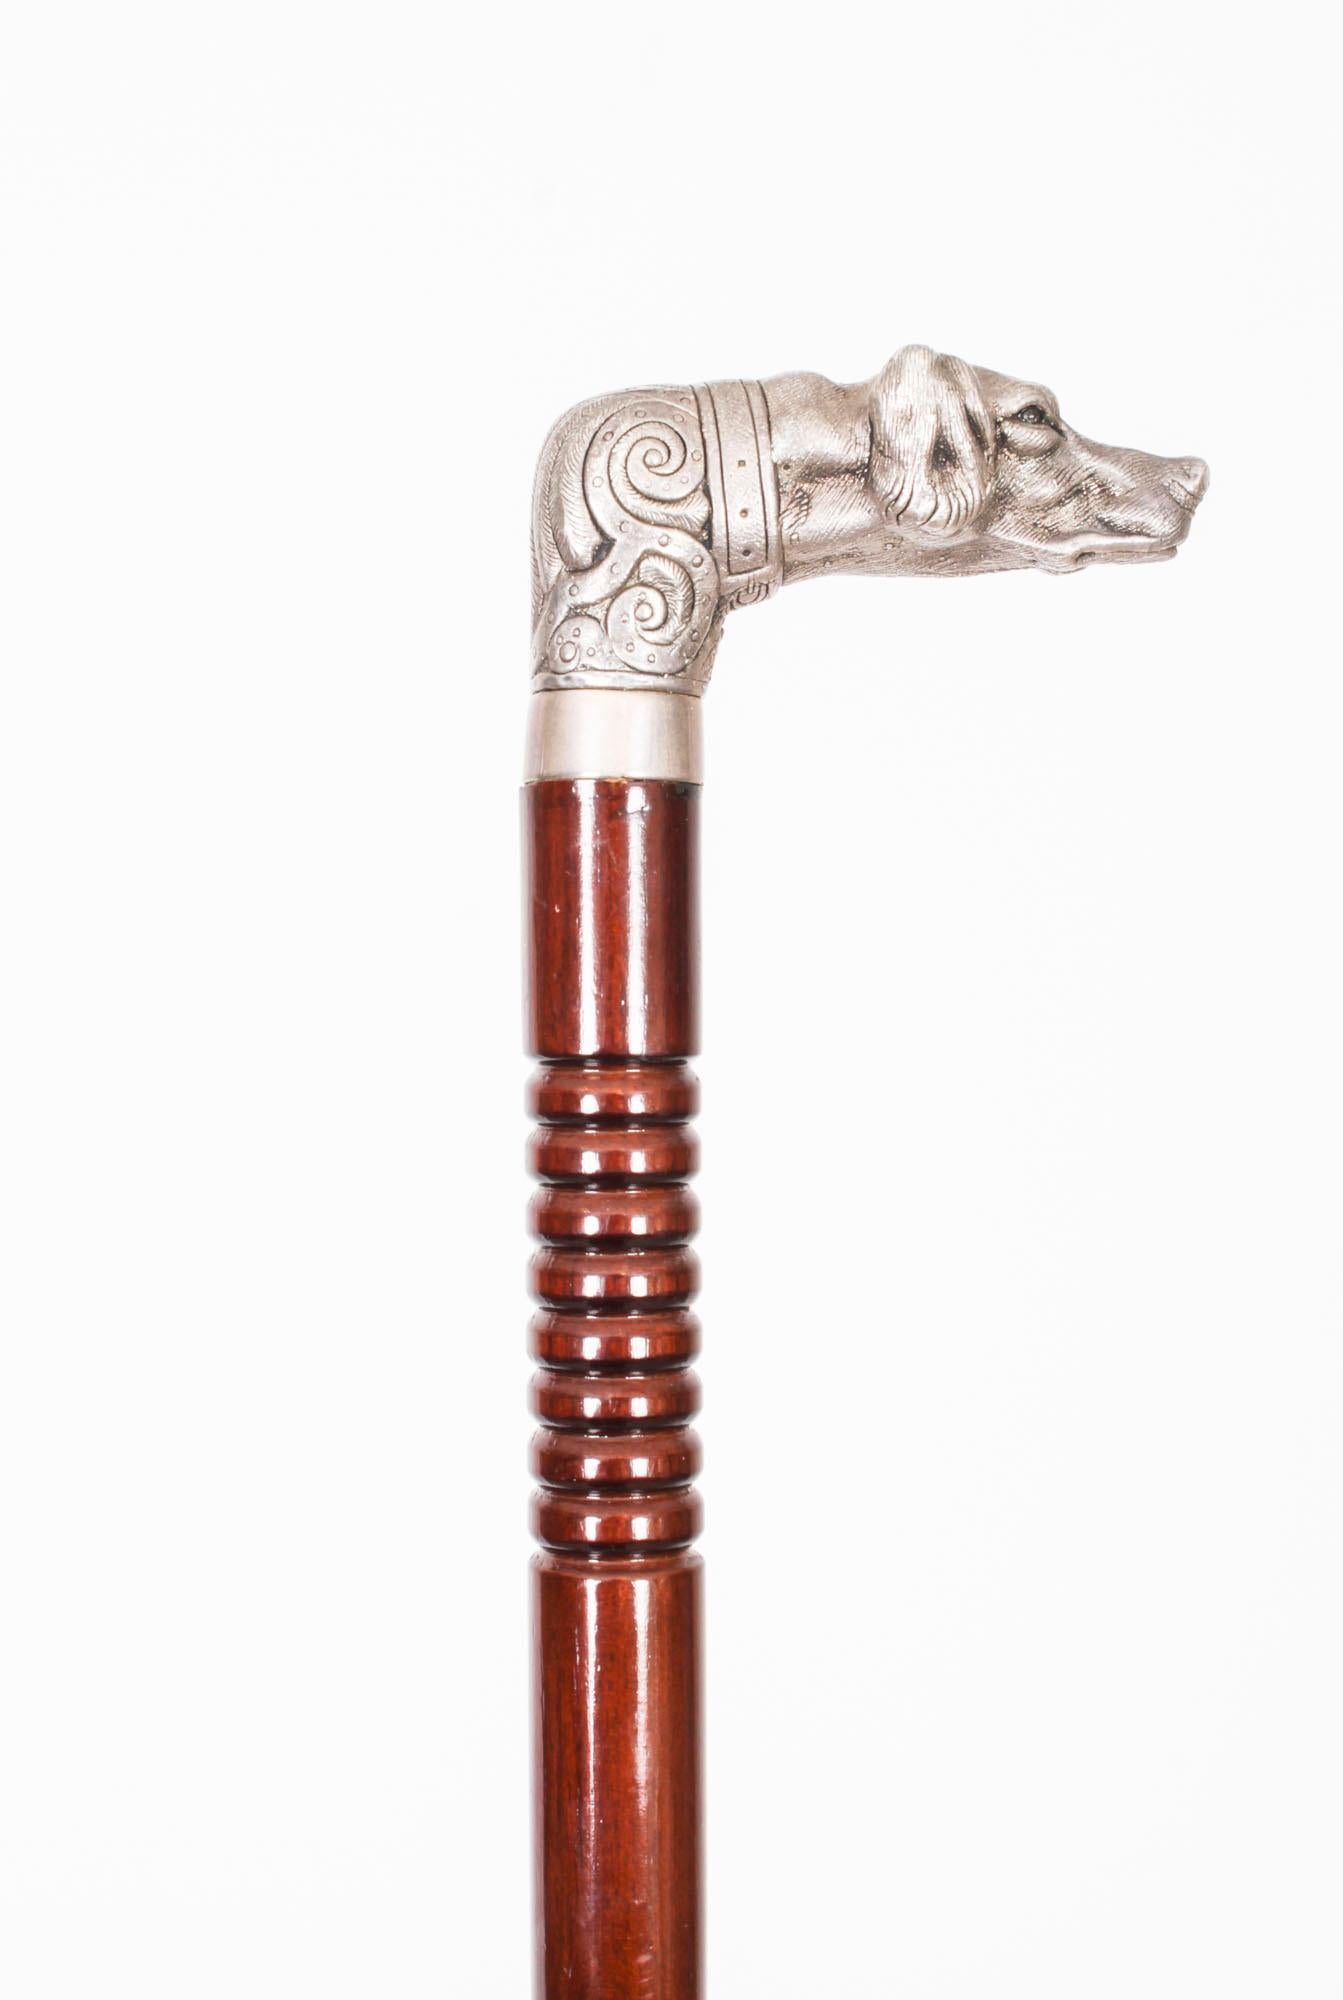 This is a beautiful vintage sterling silver pommel walking stick bearing hallmarks for London,  dated 2007, by the renowned silversmith William Comyns & Sons.

The striking stick features an ornate novelty silver pommel with a silver collar in the